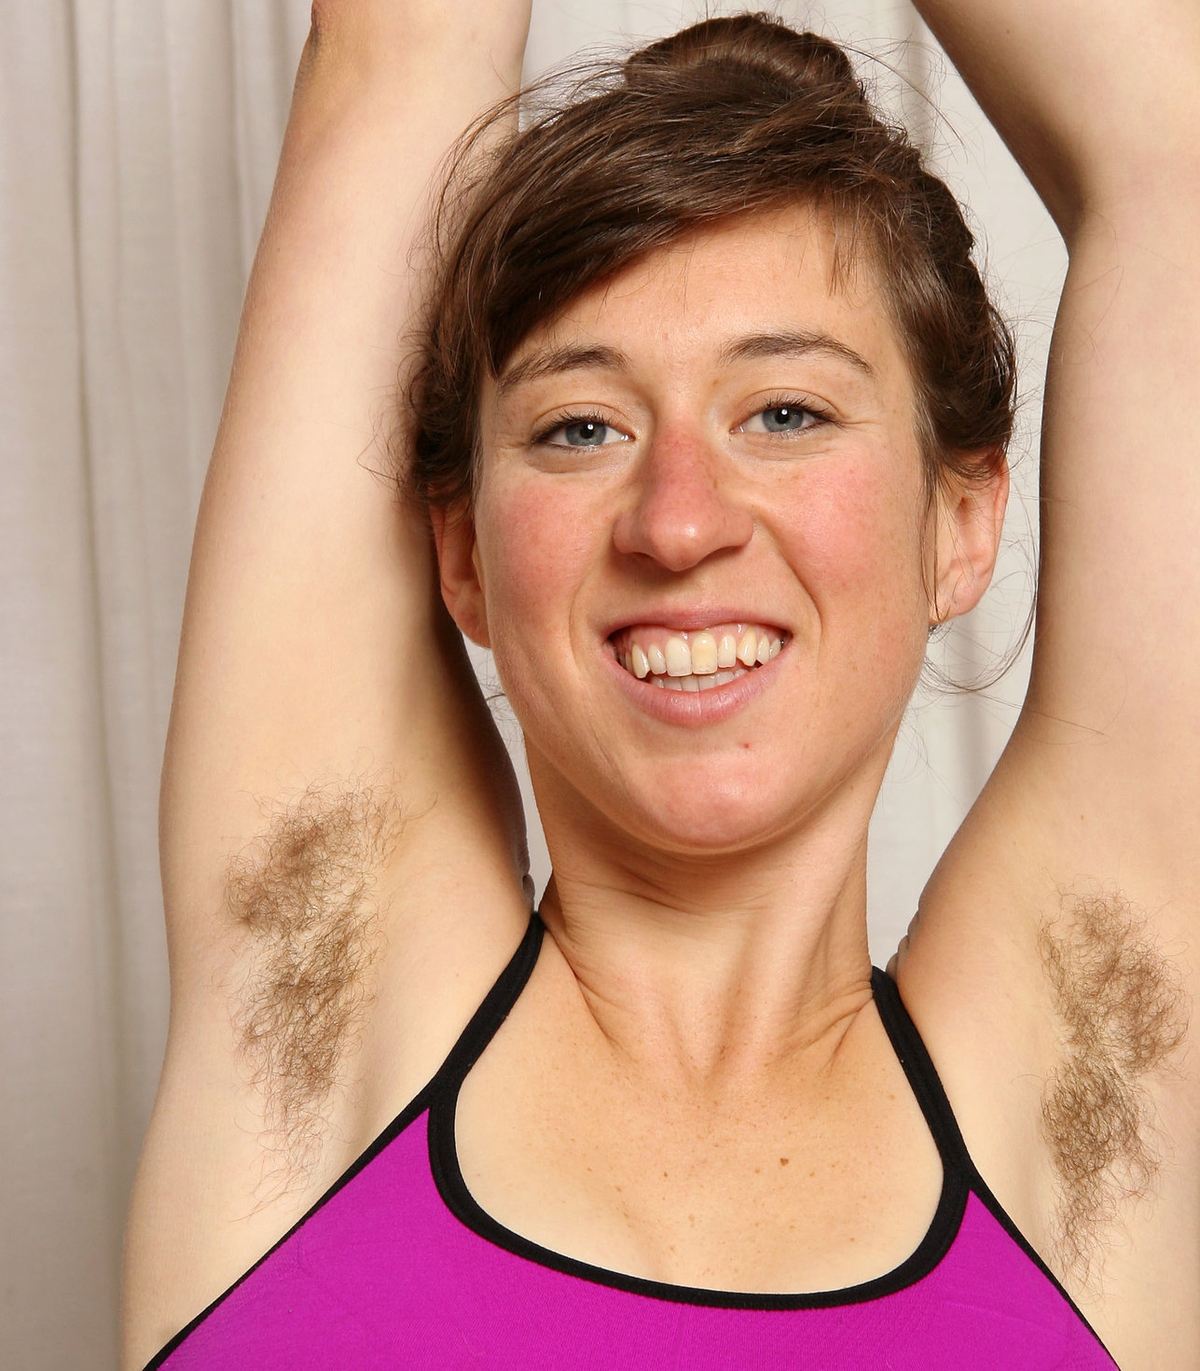 a girl named Charley showing her hairy armpits